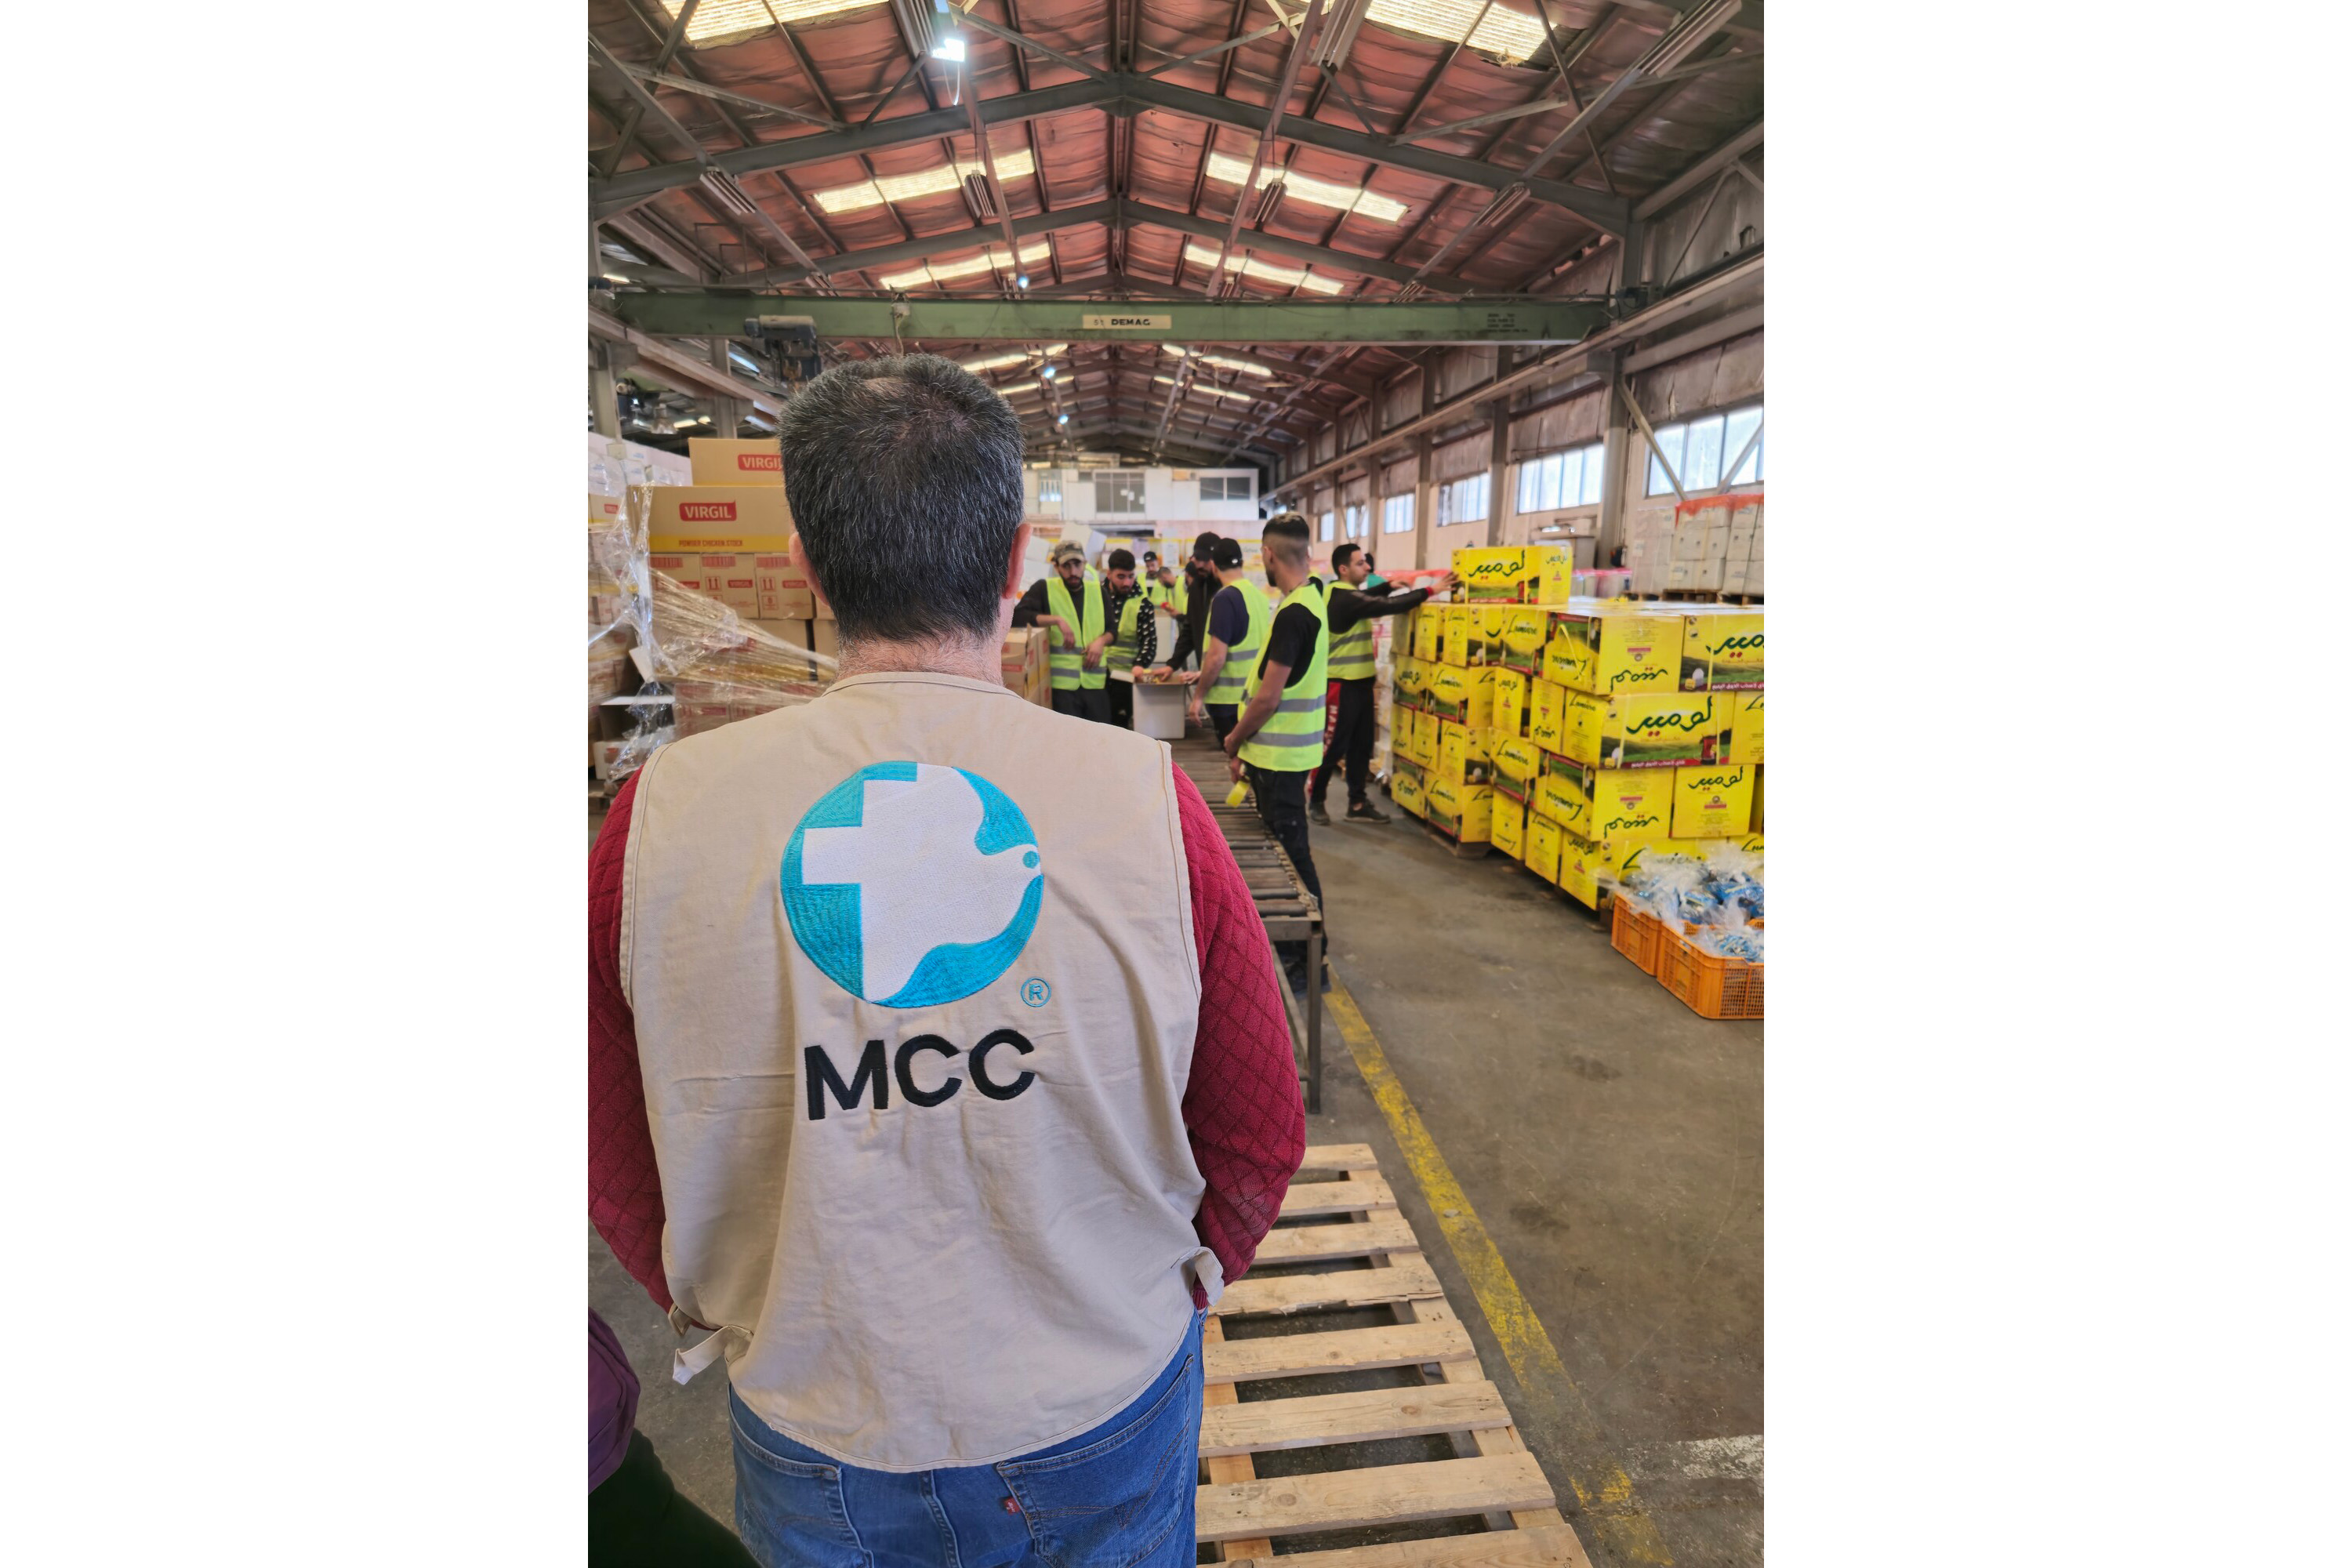 A person wearing a a vest with an MCC logo in a warehouse